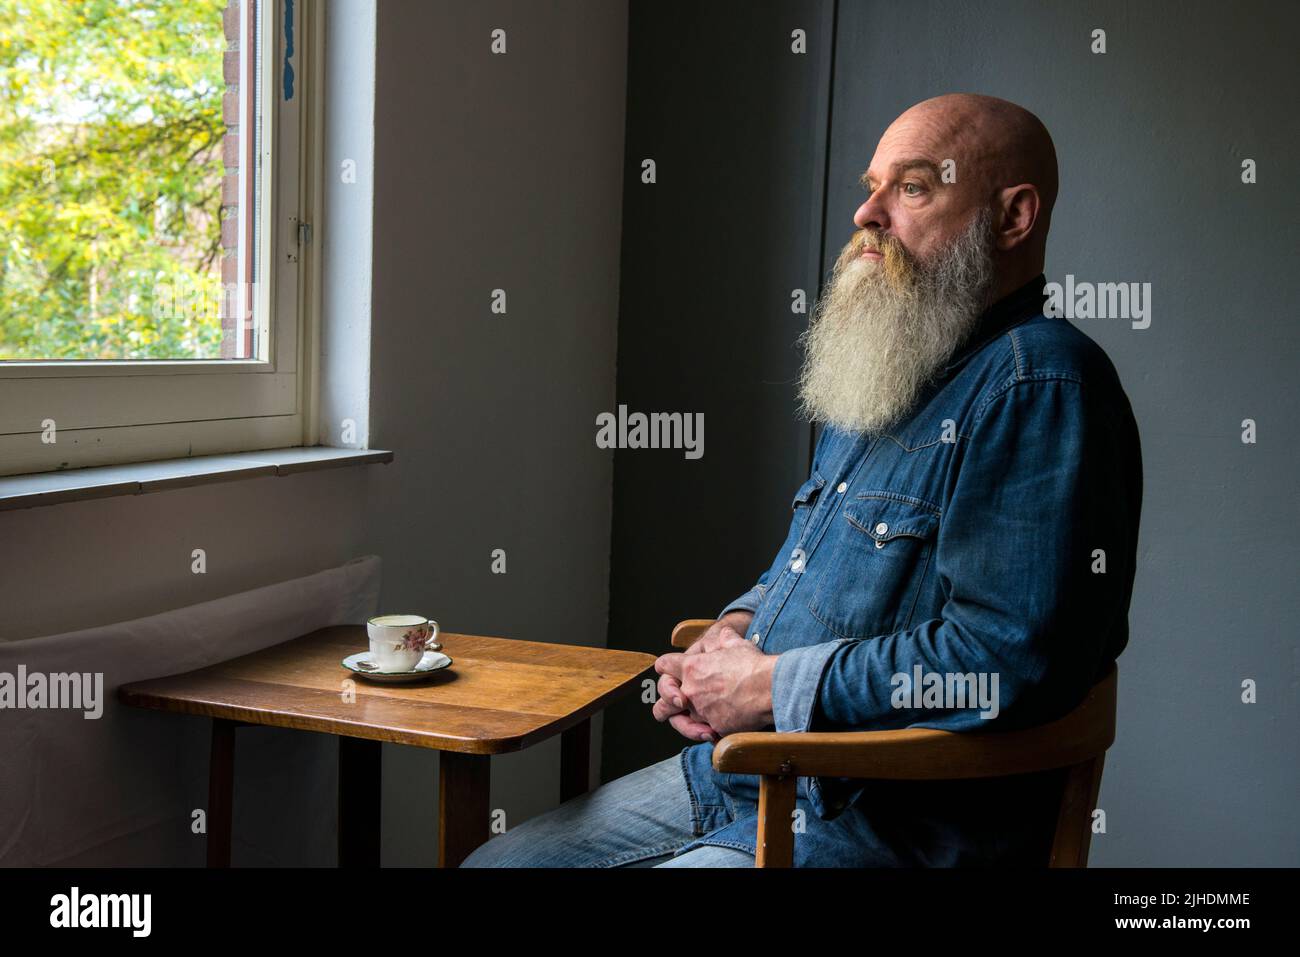 Tilburg, Netherlands. Portrait of a mature adult, caucasian male sitting next to a coffee table, drinking a cup of tea or coffee, meanwhile being in a zen state contemplating life and enjoying the view through the window. Stock Photo